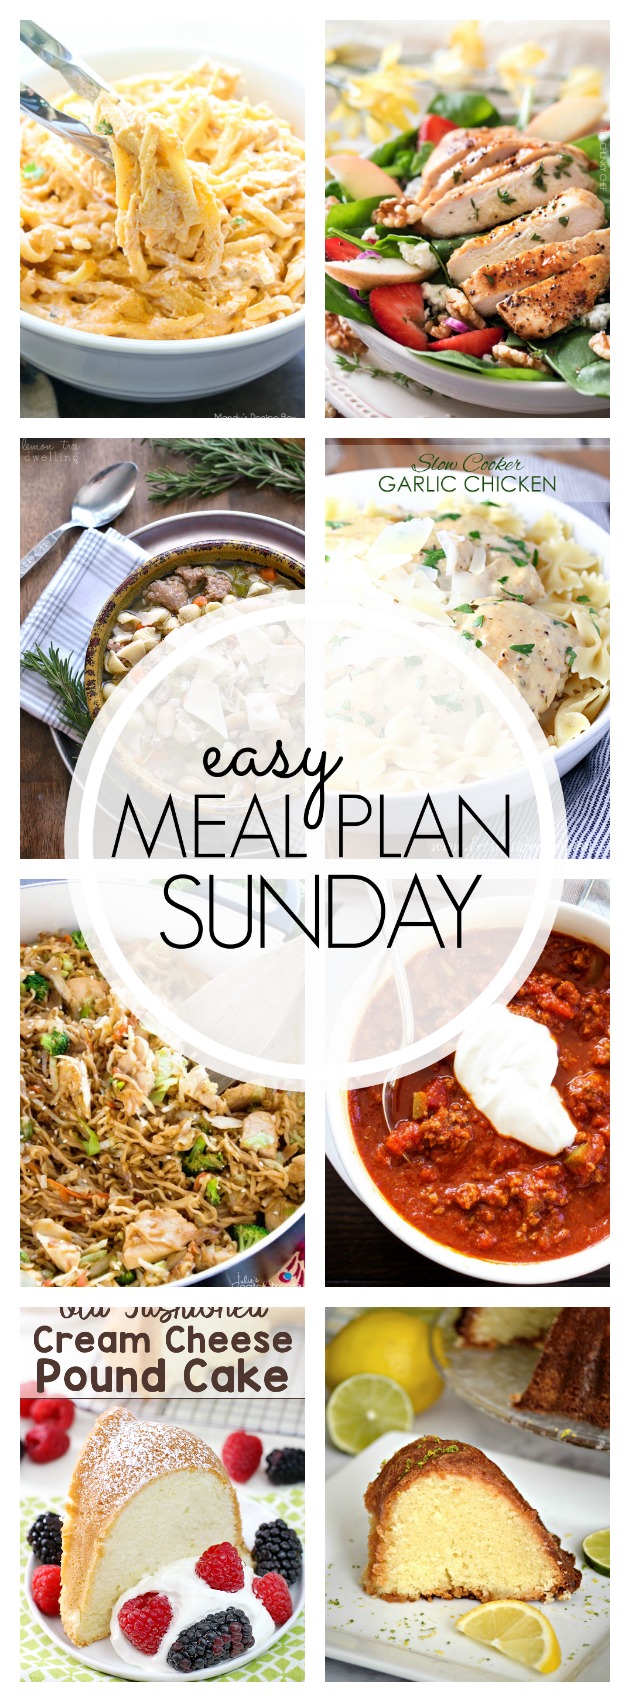 Easy Meal Plan Sunday #82